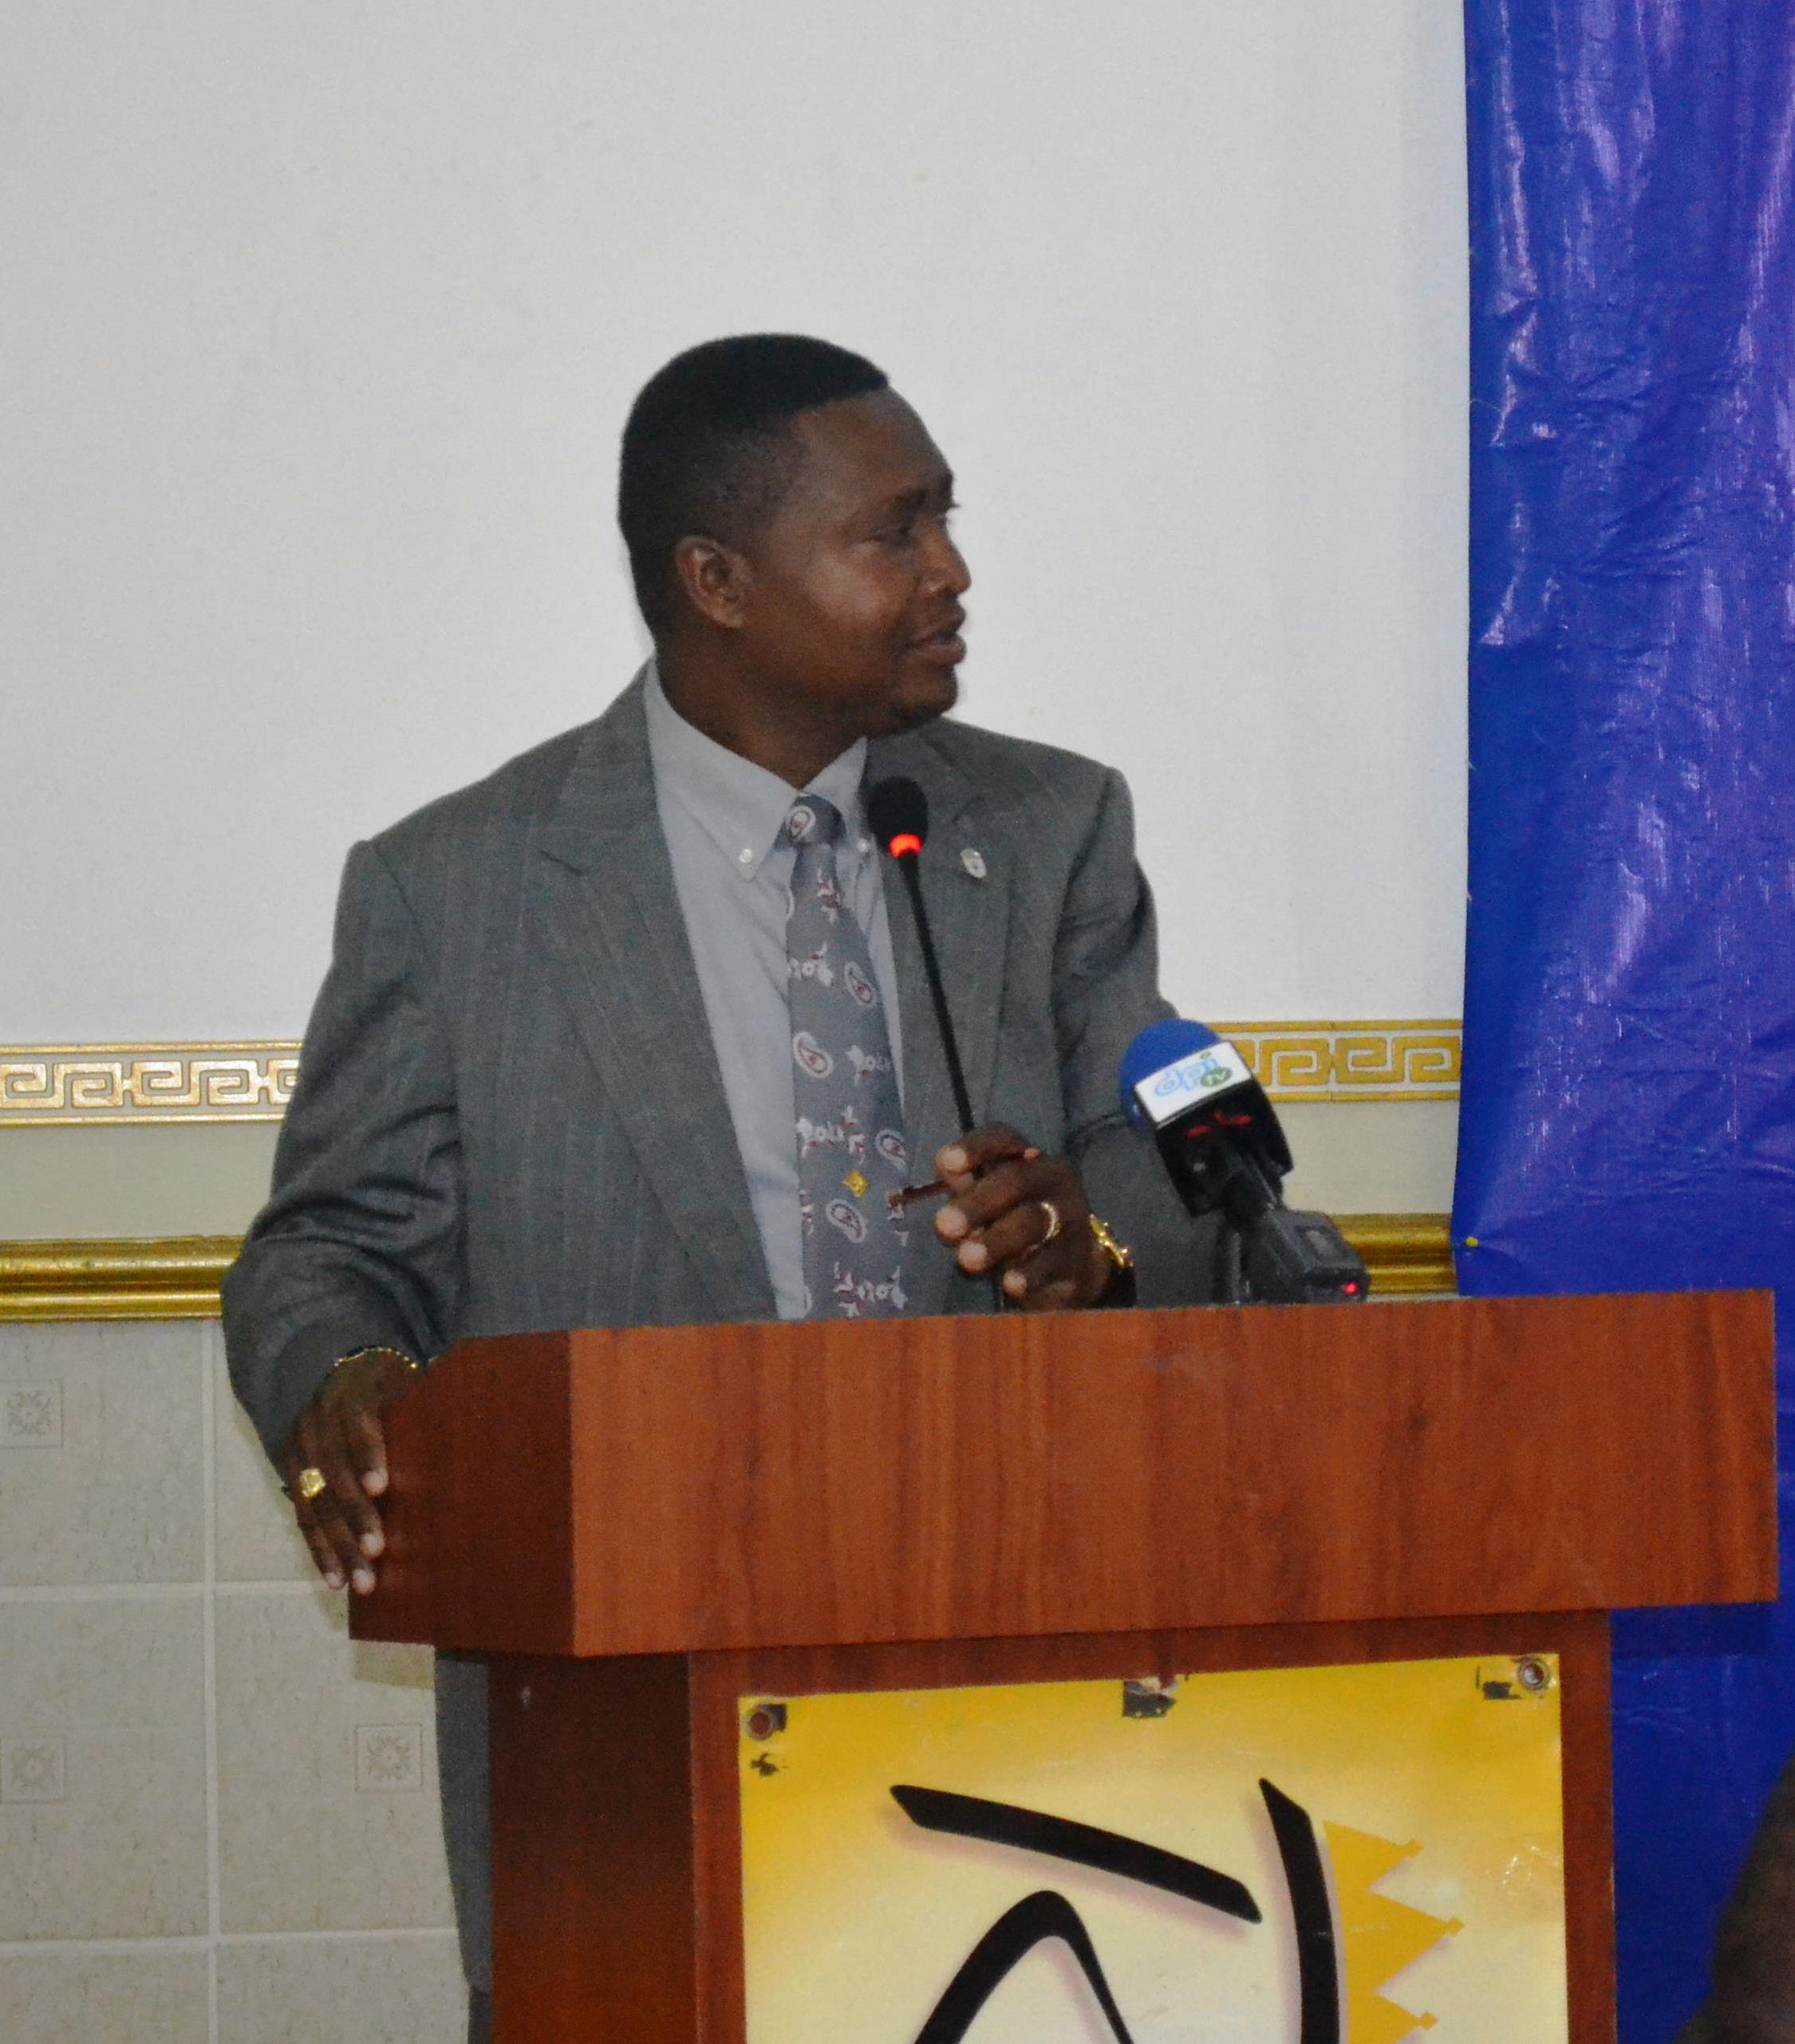 Permanent Secretary, Department of Public Service, Ministry of the Presidency, Mr. Reginald Brotherson